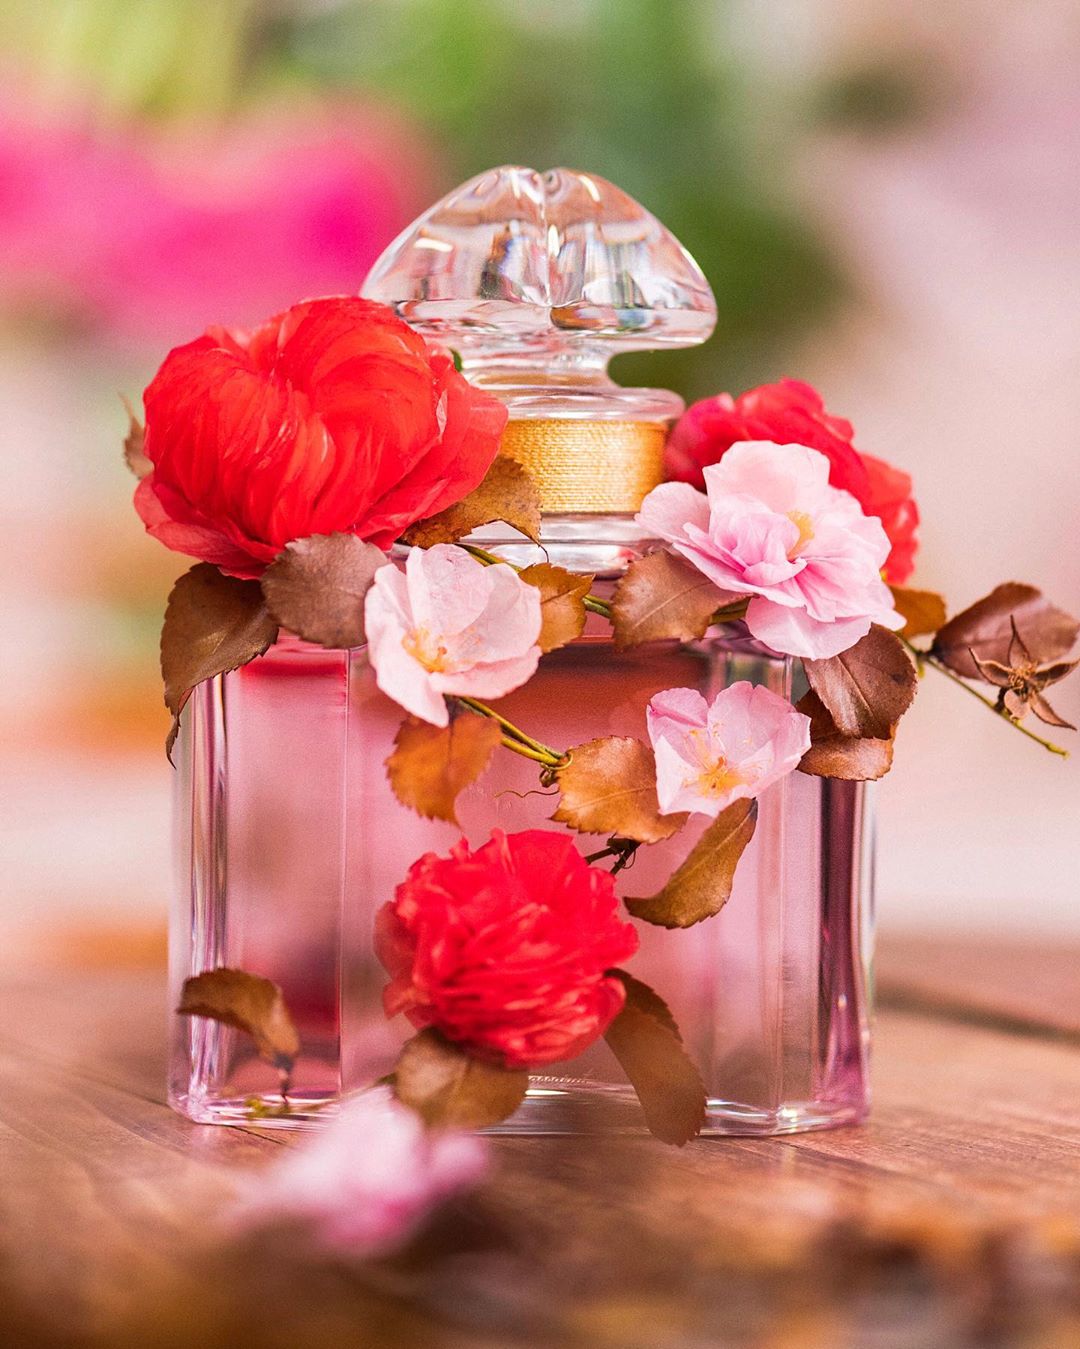 Guerlain - Mon Guerlain Prestige Edition: an unexpected oeuvre d'art crafted by upcycling artist William Amor.

Born of a unique collaboration with French visual artist William Amor, committed to sust...